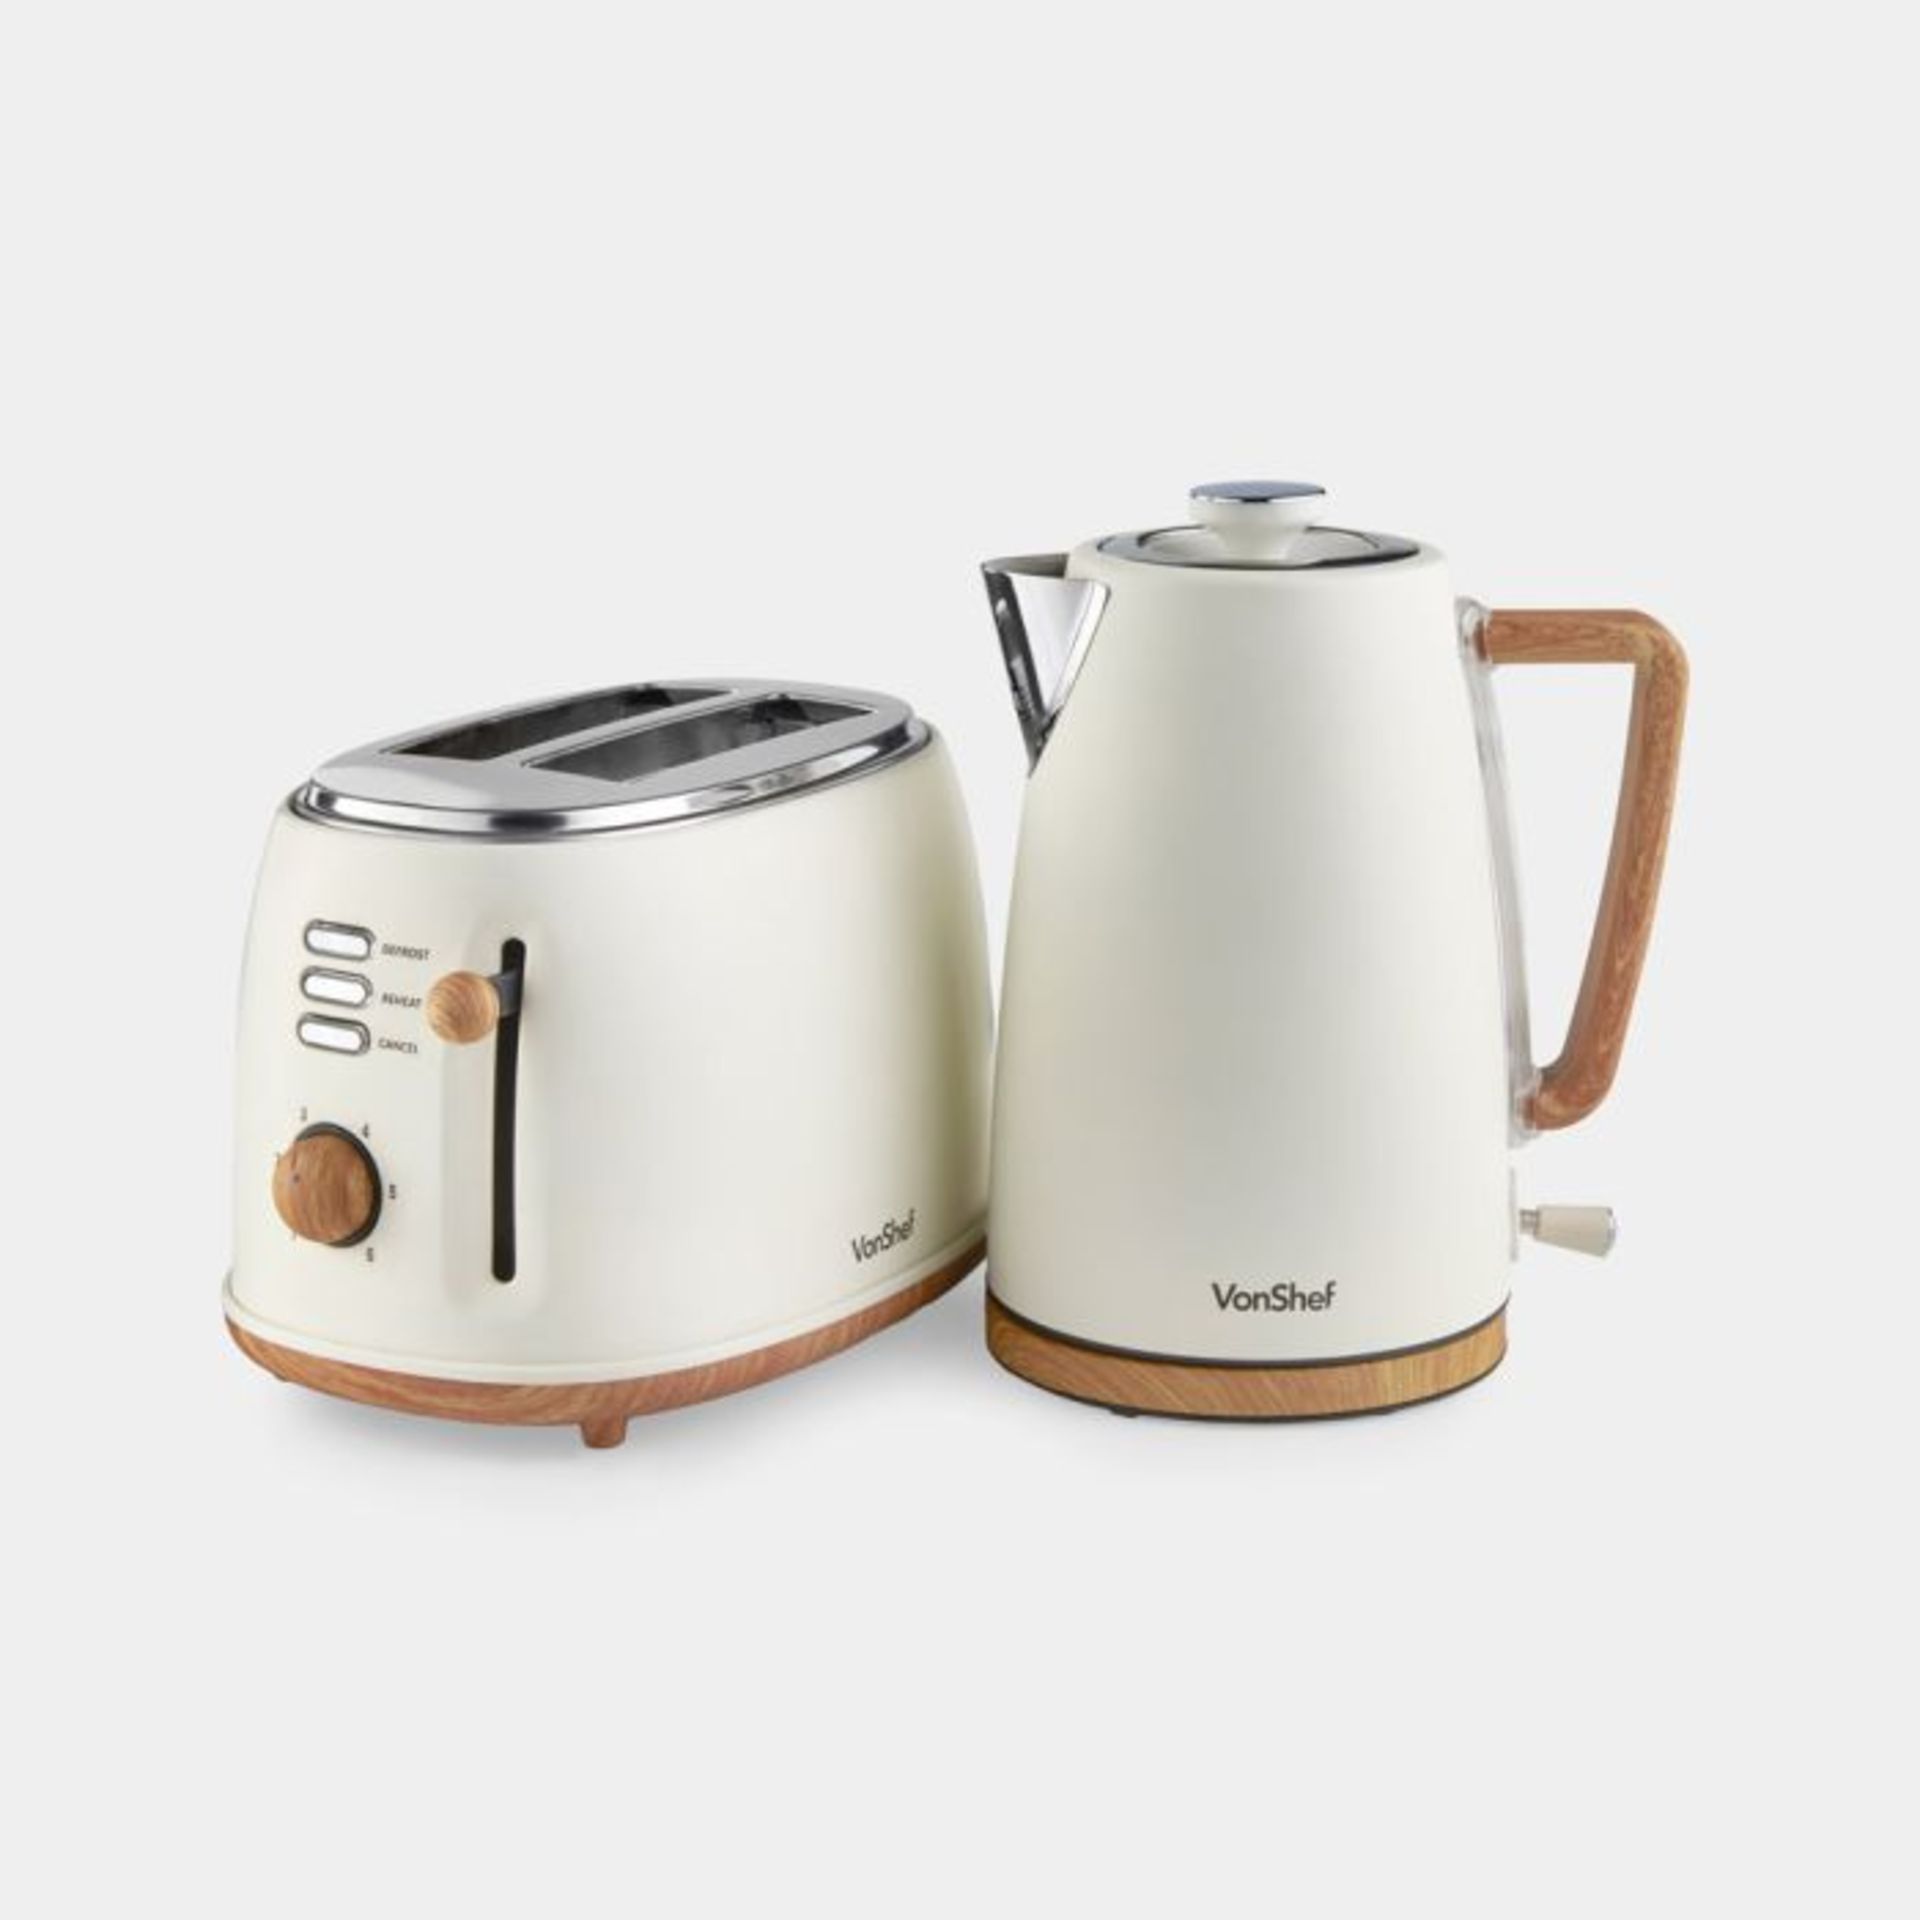 Cream & Wood Fika 2 slice Kettle & Toaster Set. - PW. Featuring wood-effect accents and a clean